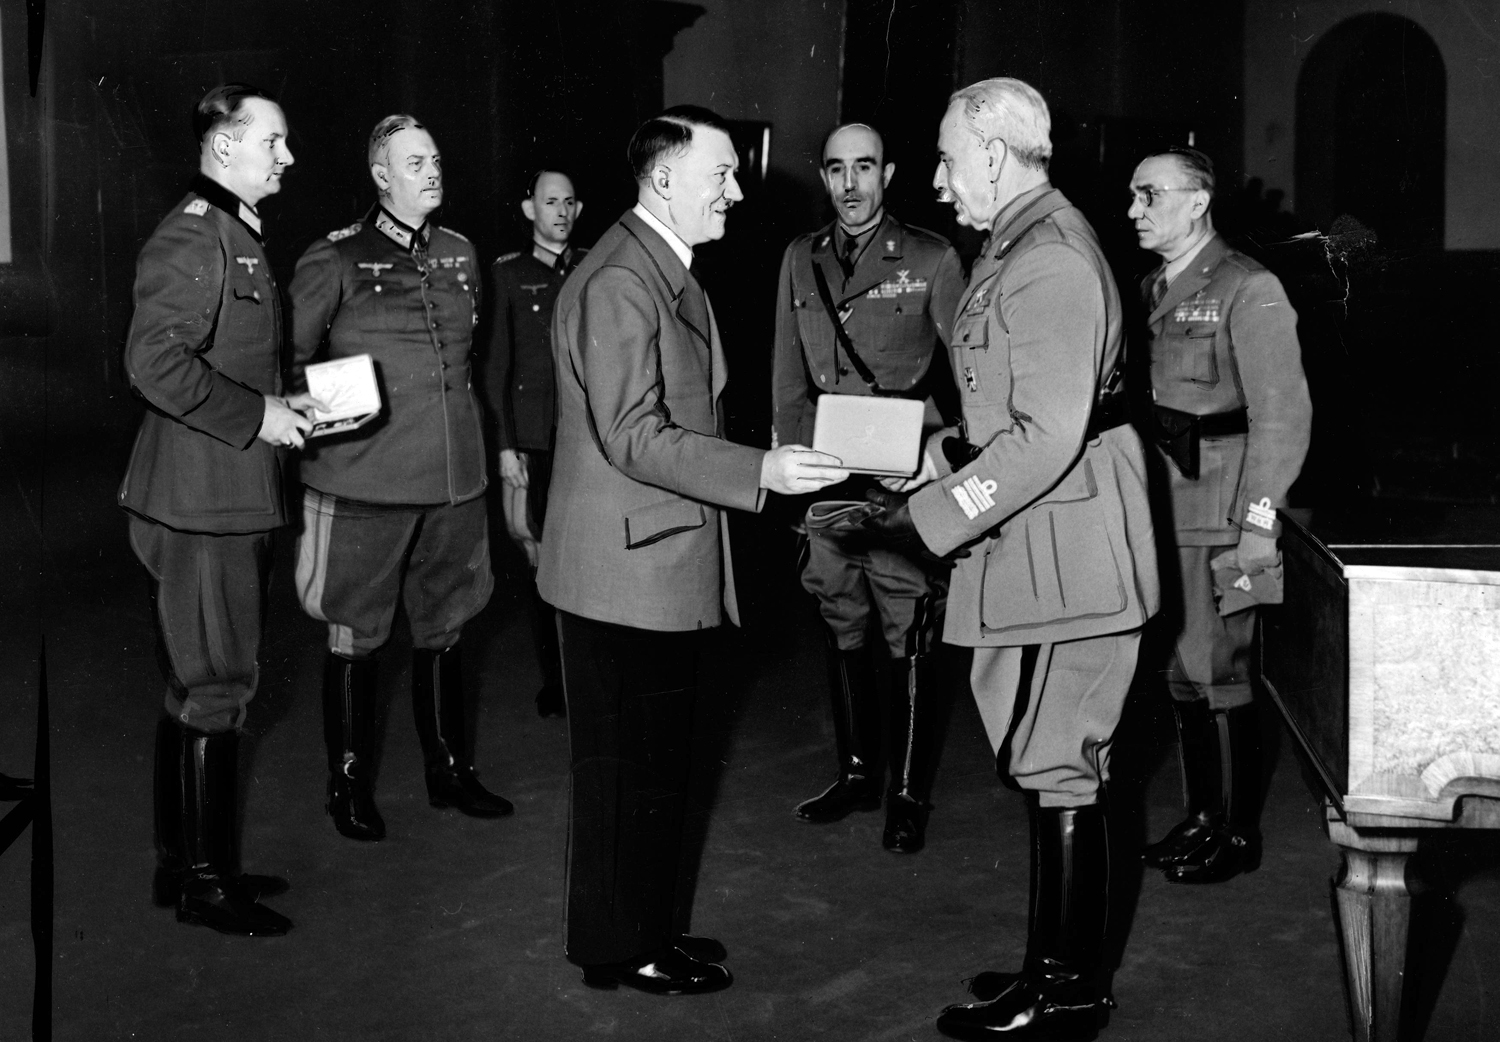 Adolf Hitler awards general Italo Gariboldi with the Knight's cross of the Iron cross at the Berghof